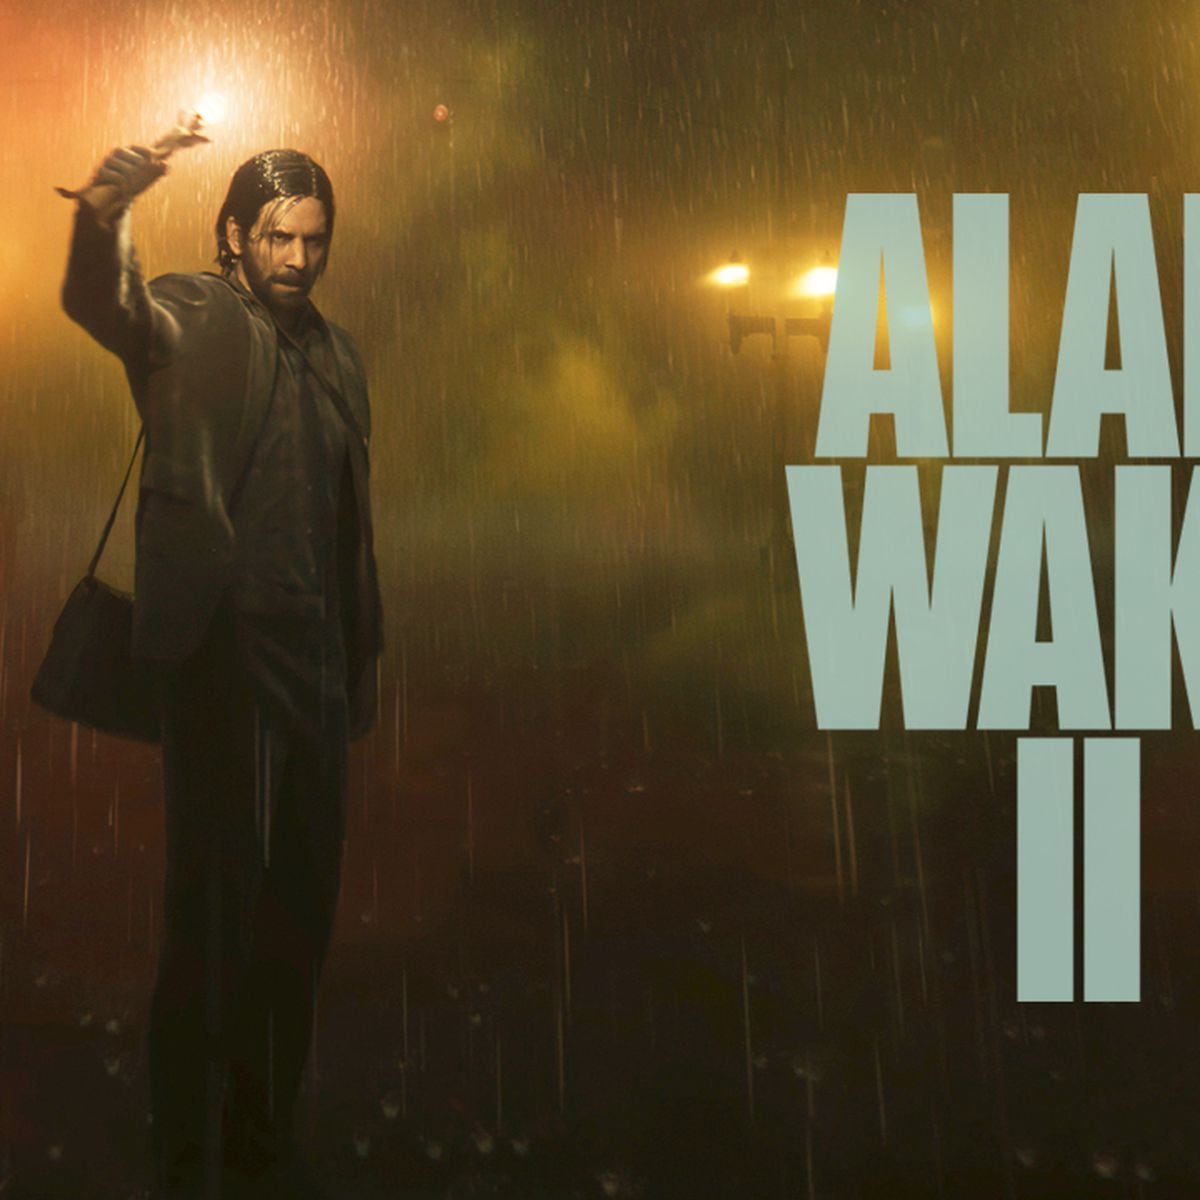 Alan Wake 2 Will Be Digital Only, Won't Be Releasing On A Disc